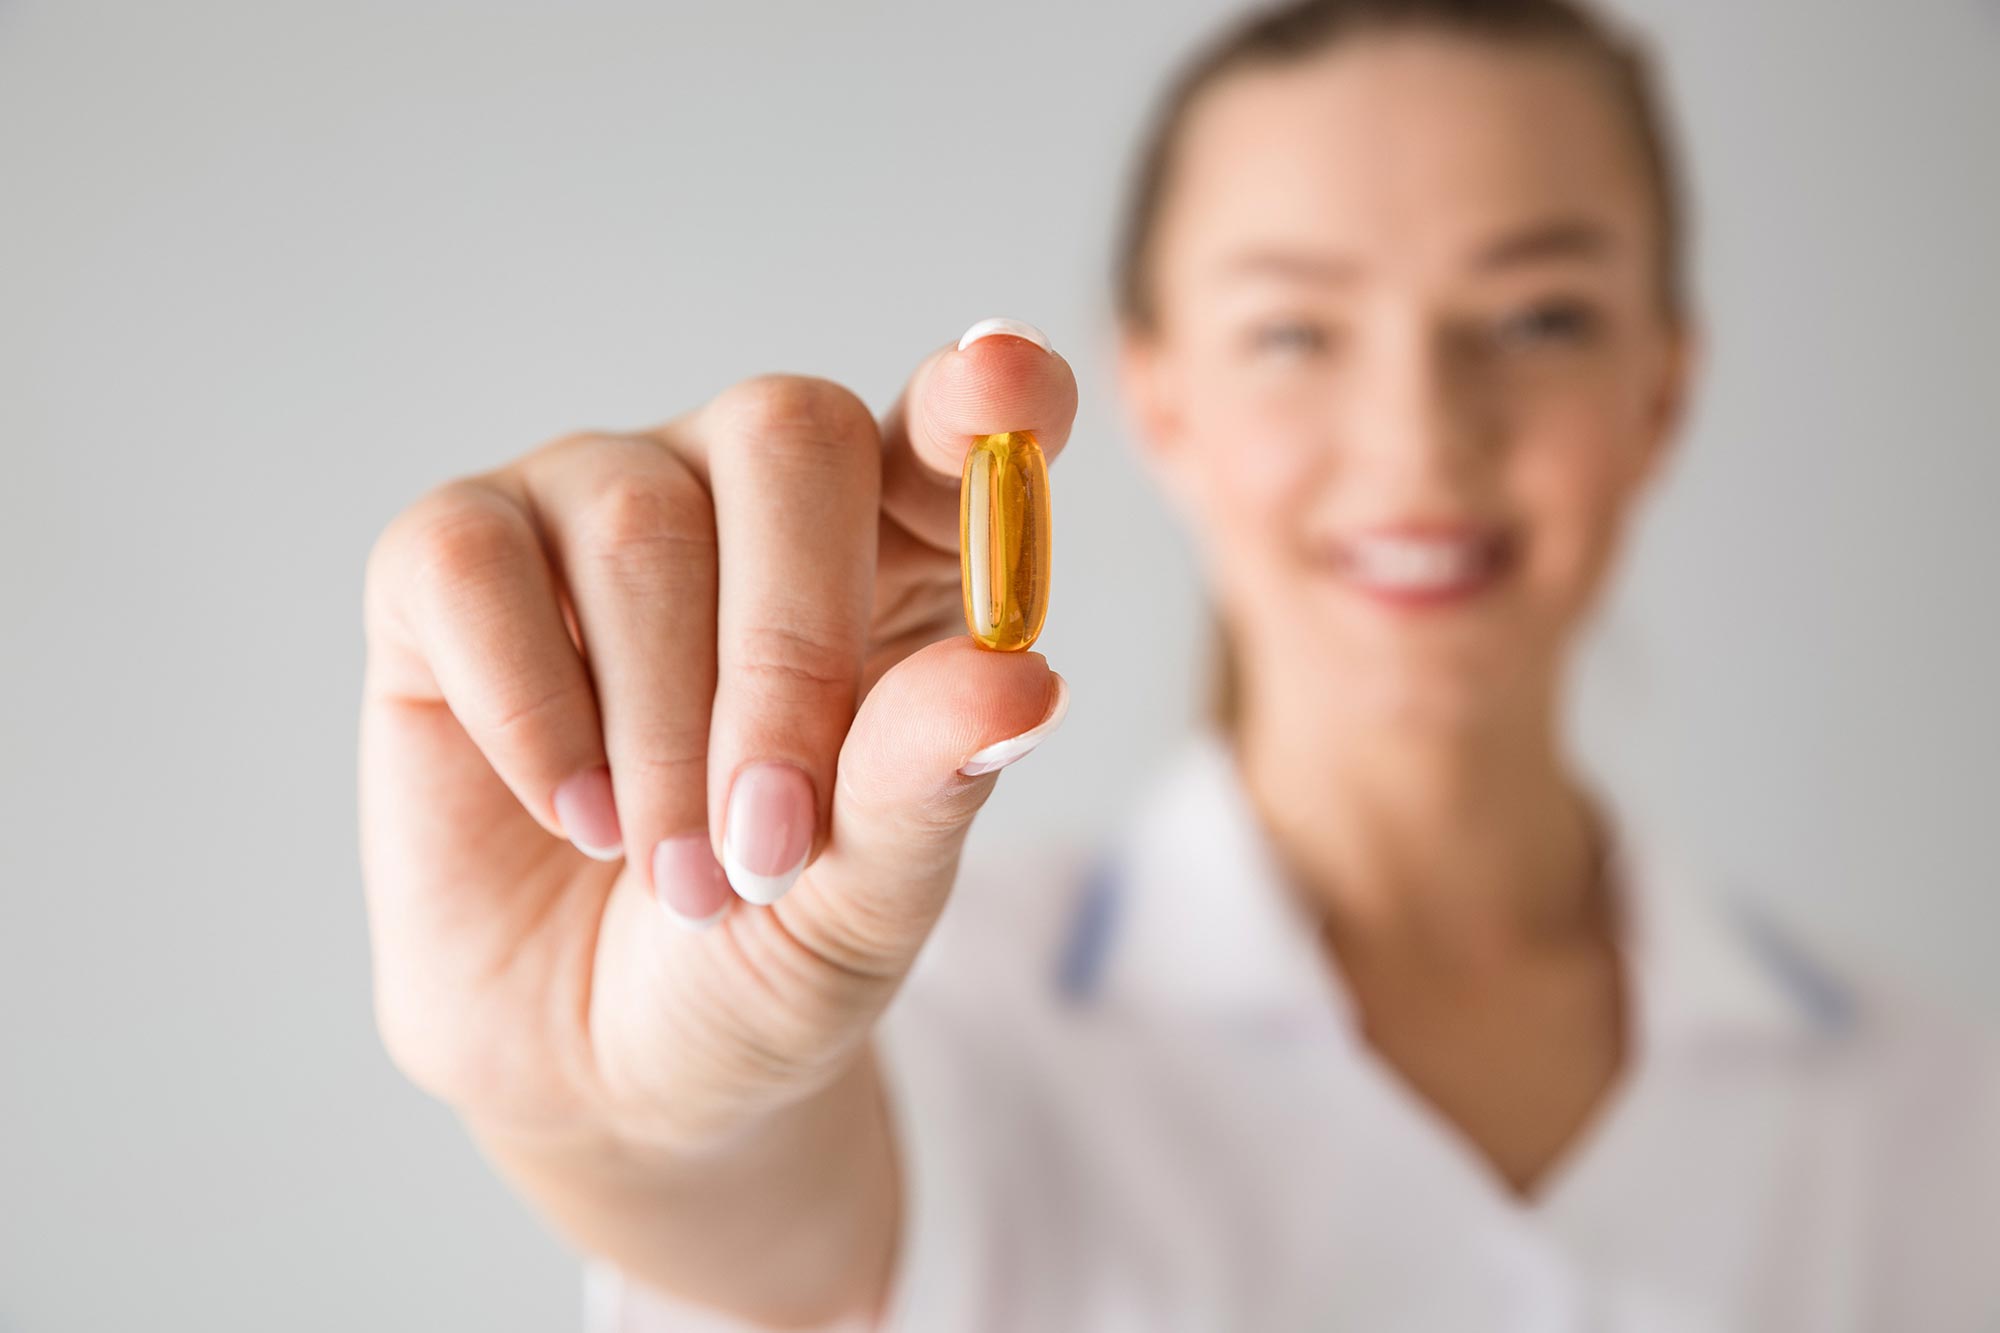 Slowing Cognitive Aging: Major Study Finds Daily Multivitamin Improves Memory in Older Adults thumbnail